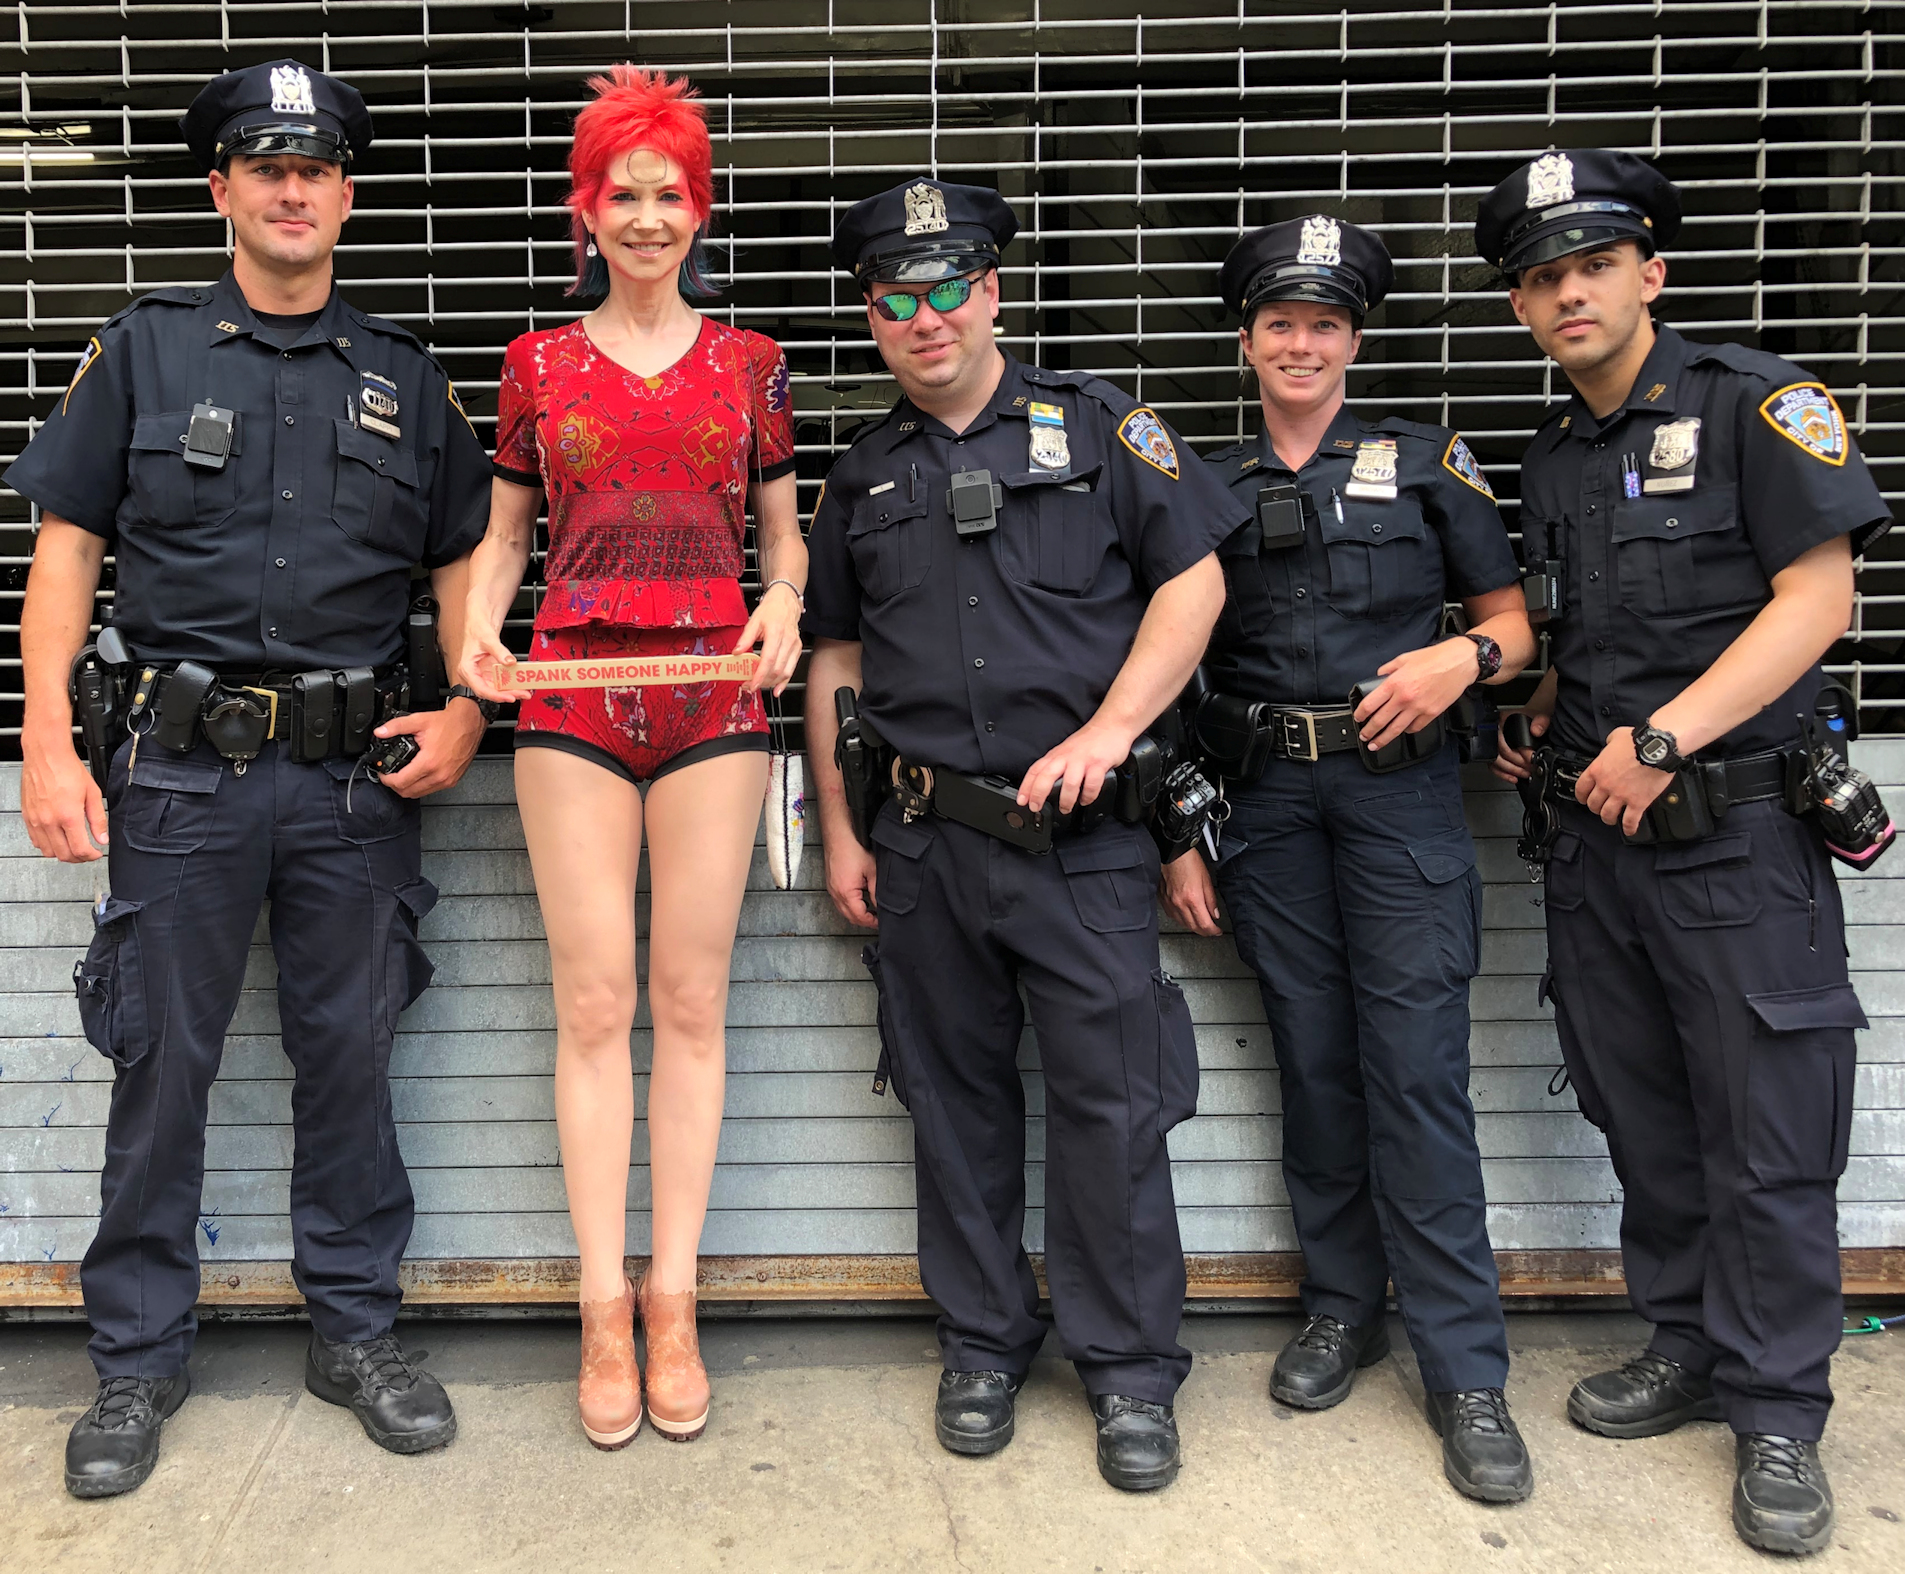 Karen Yvonne Rempel New York fashion model Karen's Quirky Style in police line-up during World Pride parade 2019 in the West Village, NYC